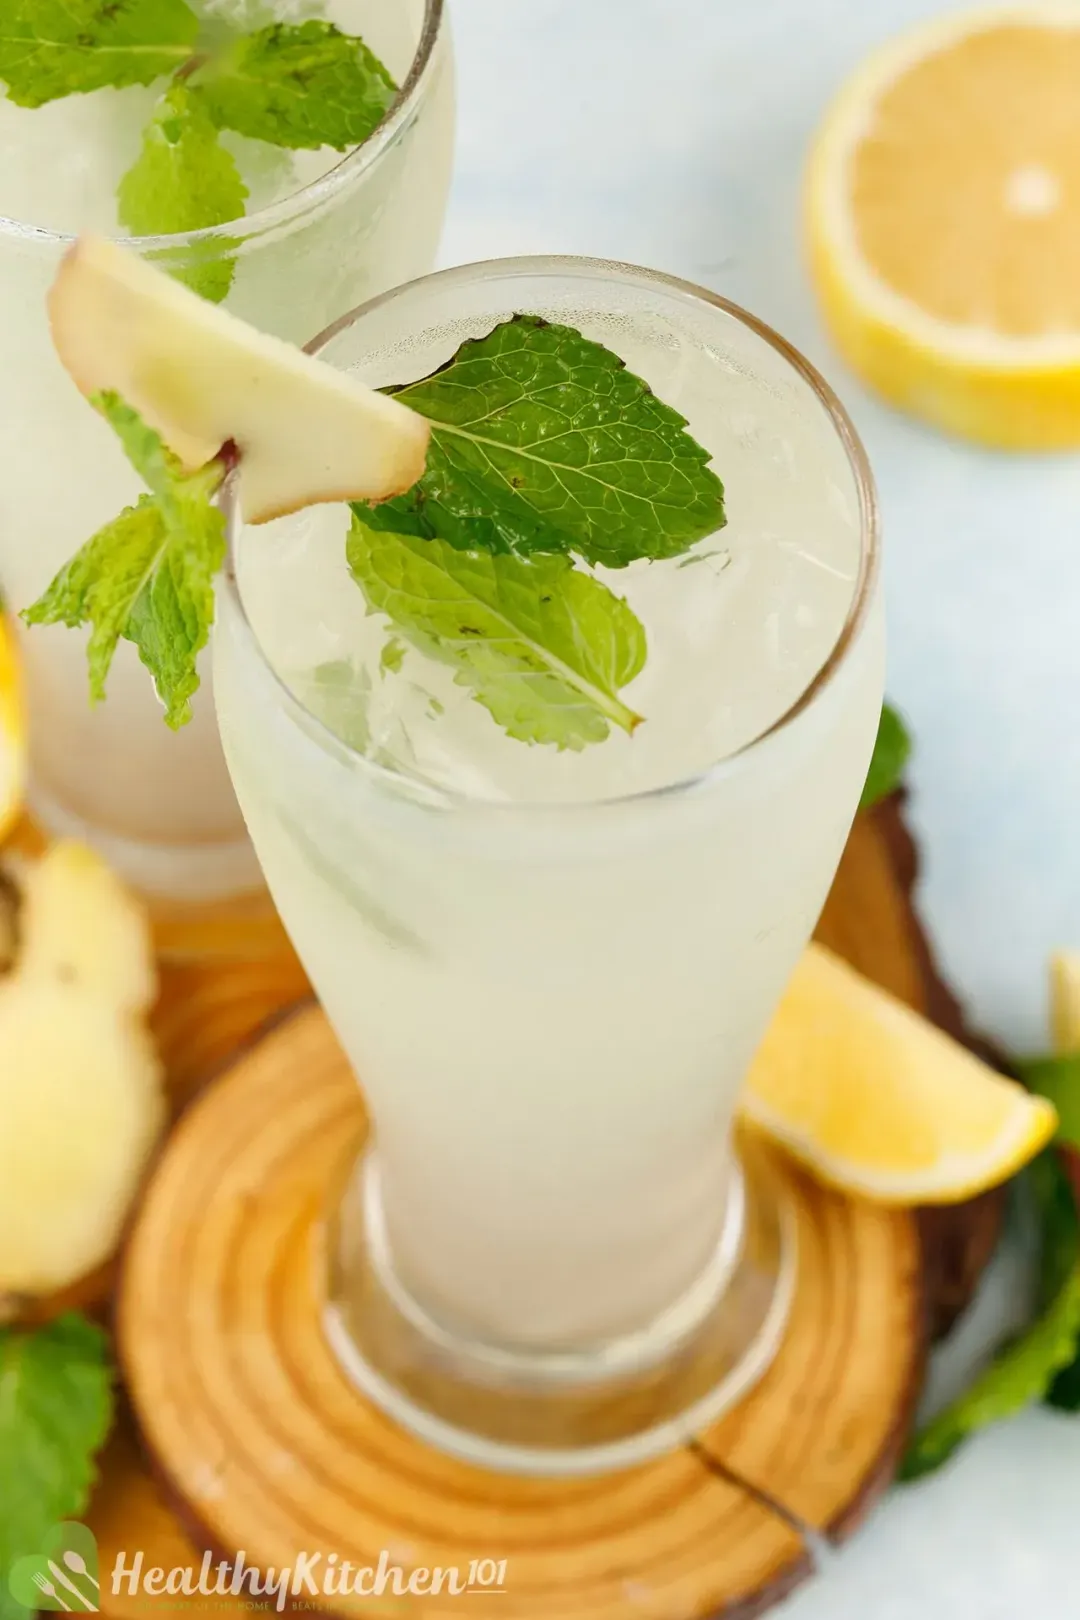 A tall glass of iced drink topped with mint leaves, ginger slice, and put next to some lemon wedges